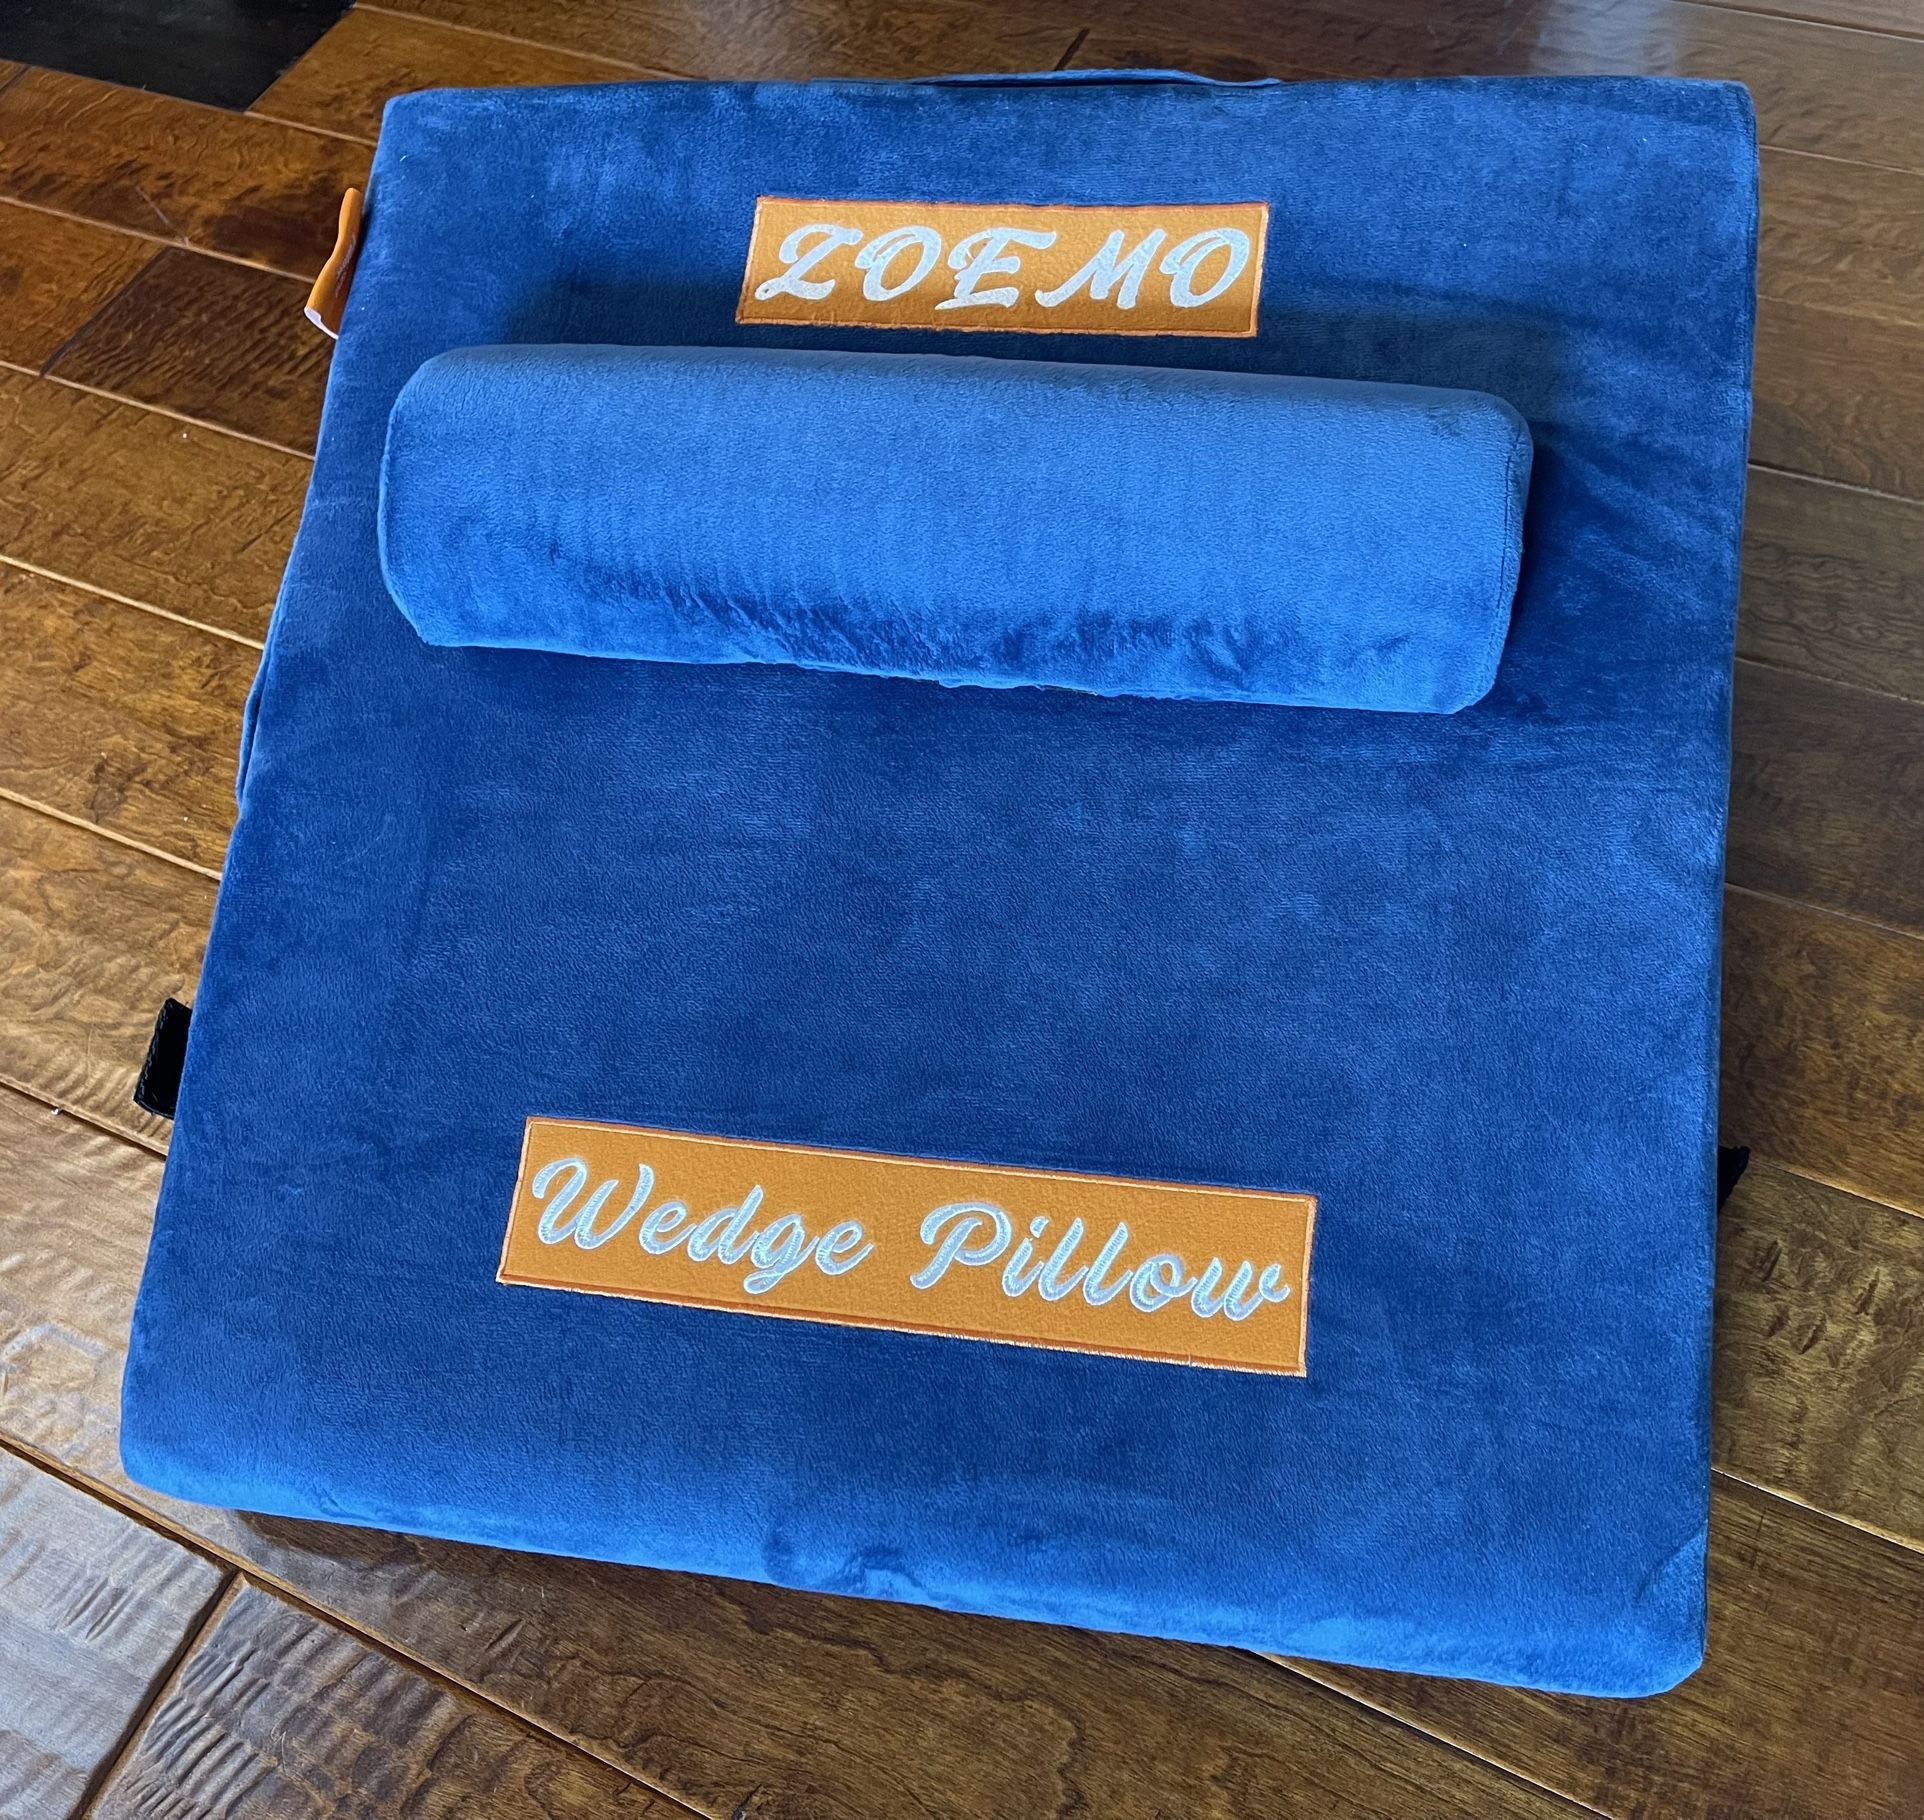 Zoemo Wedge Pillow